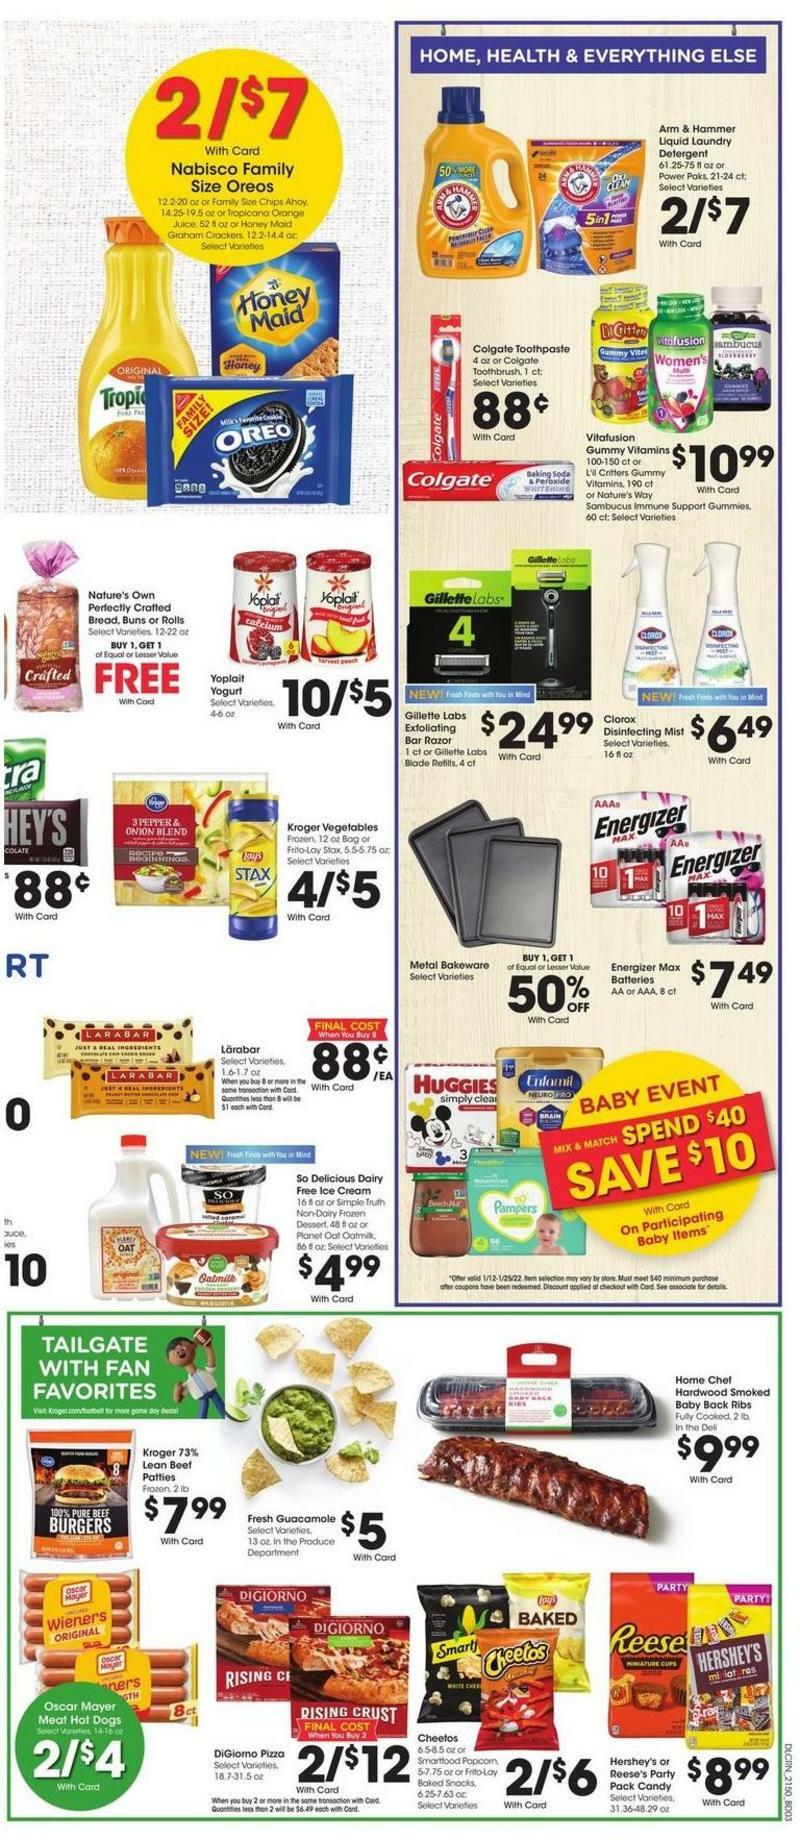 Kroger Weekly Ad from January 12